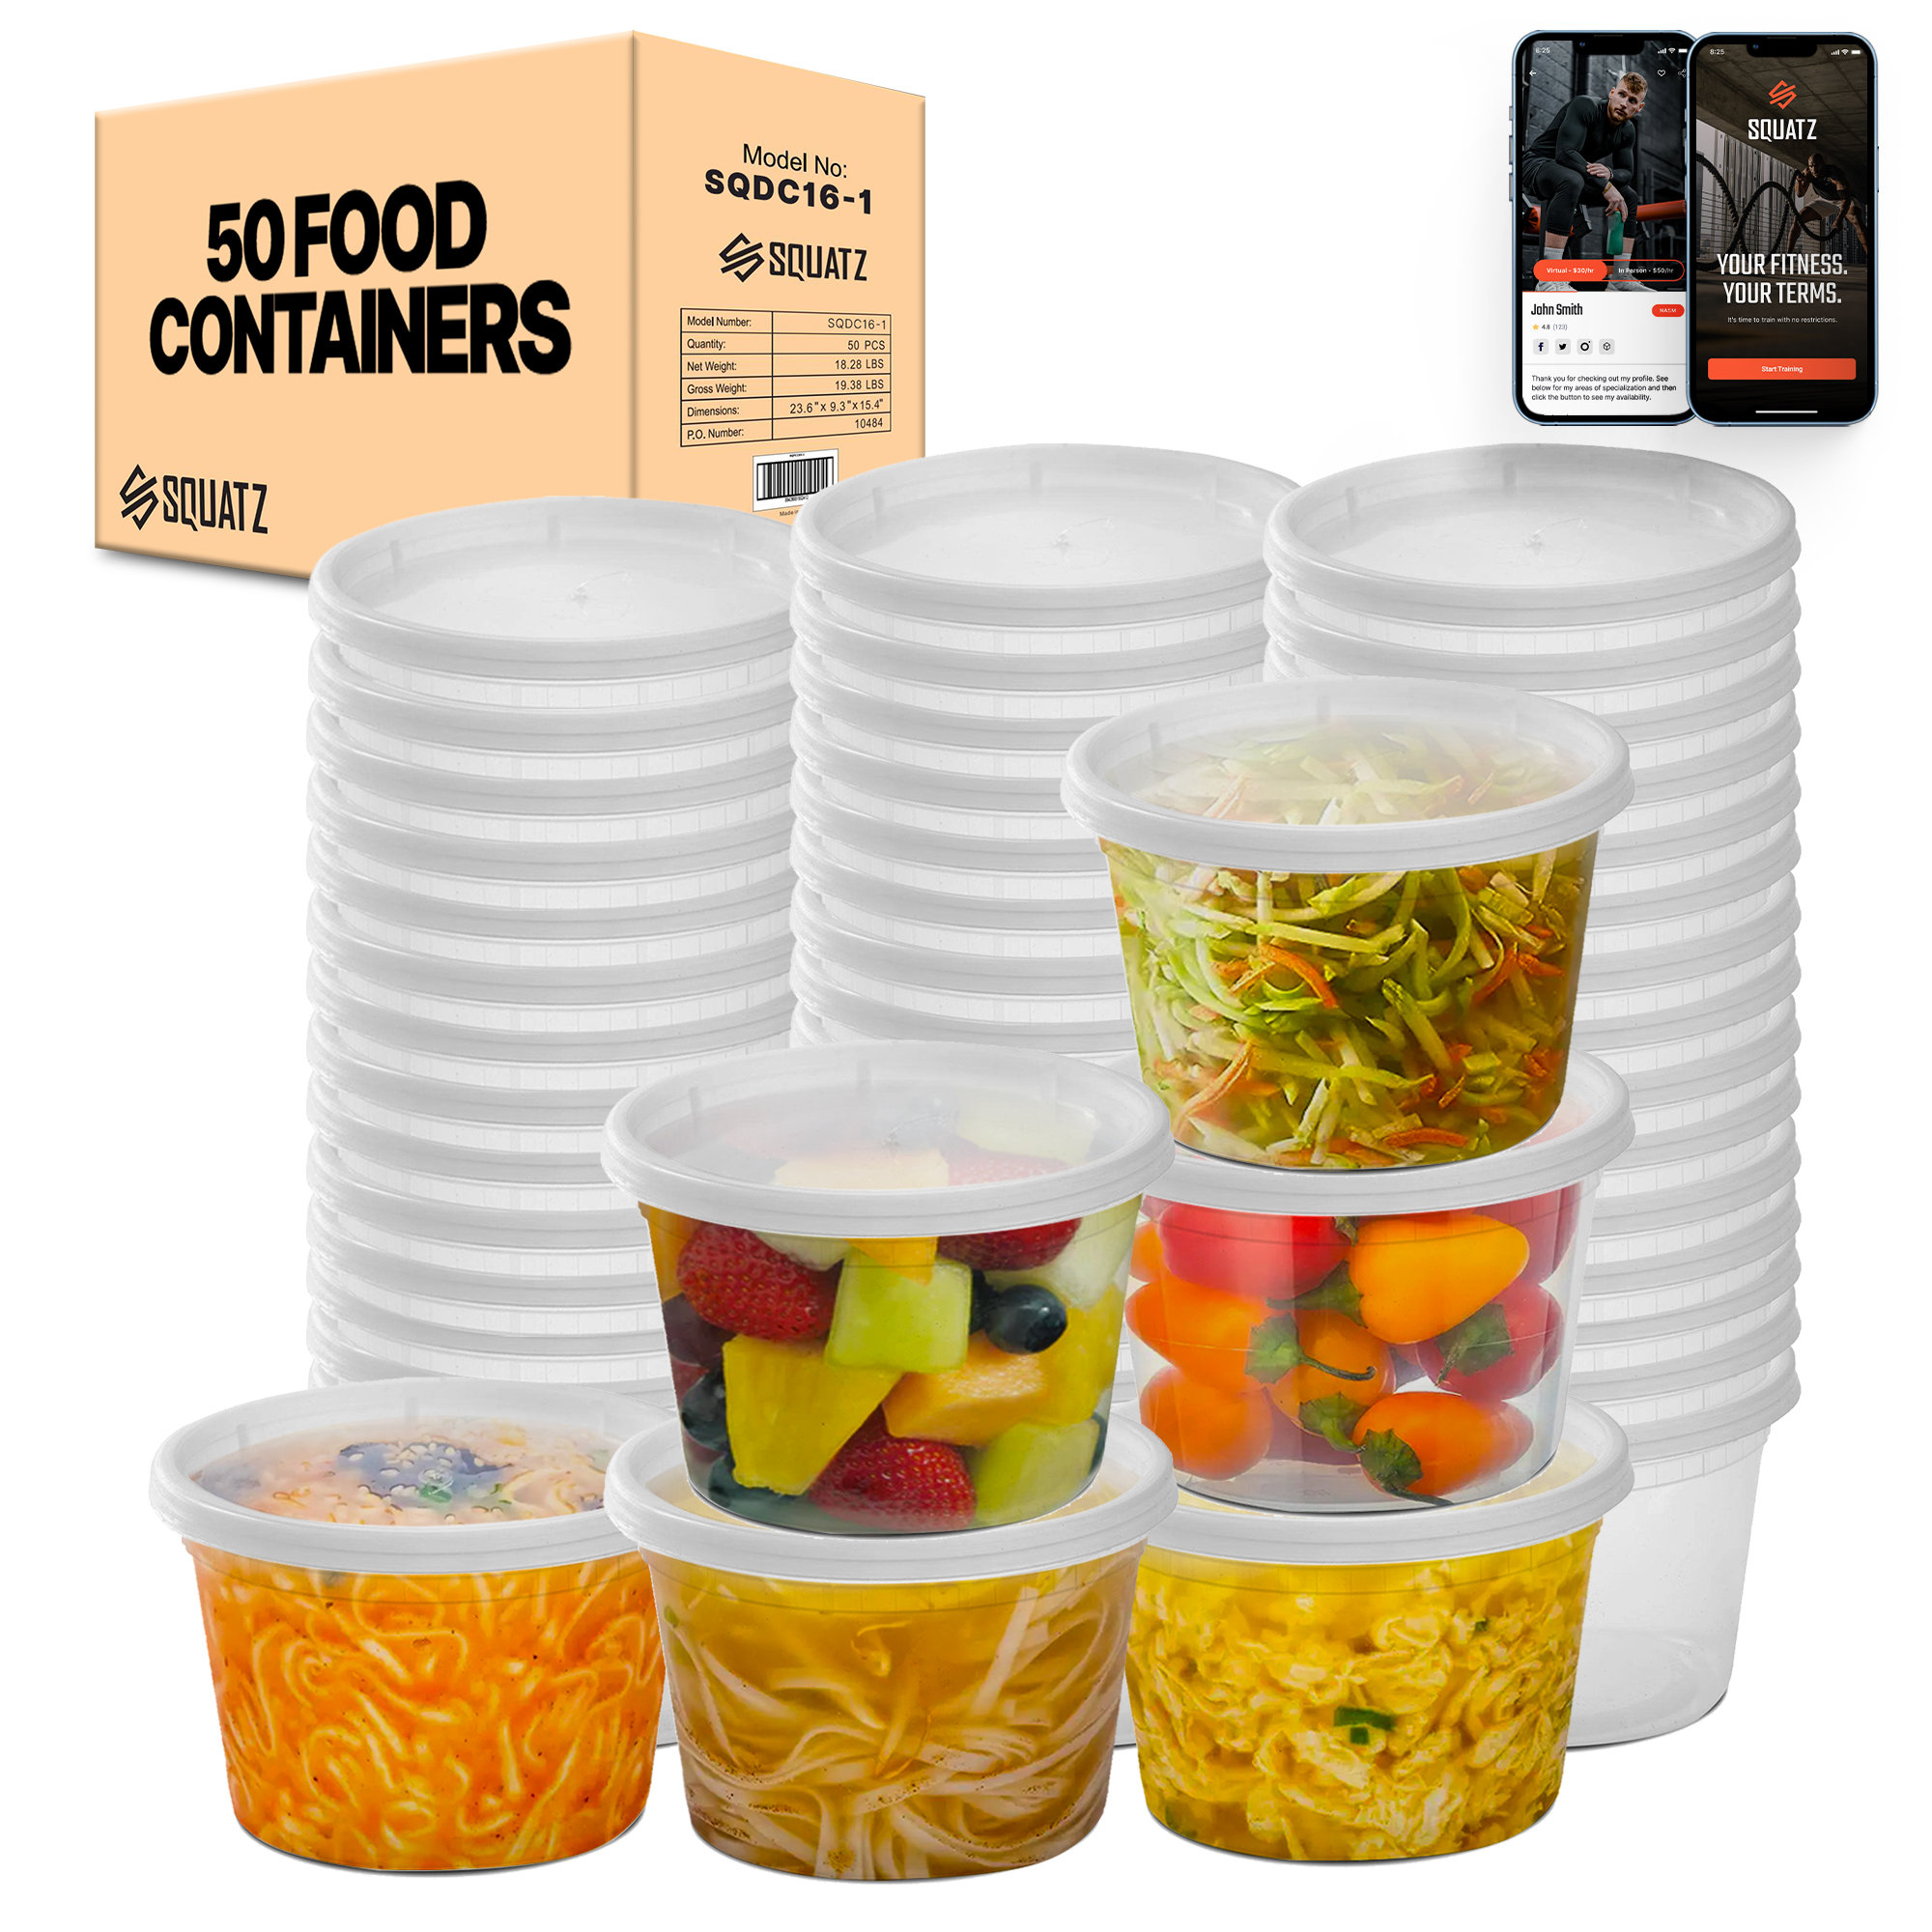 SereneLife Microwavable Soup Containers With Lids Leak Proof, Microwave,  Freezer Safe, BPA-Free, 16 Oz. Capacity